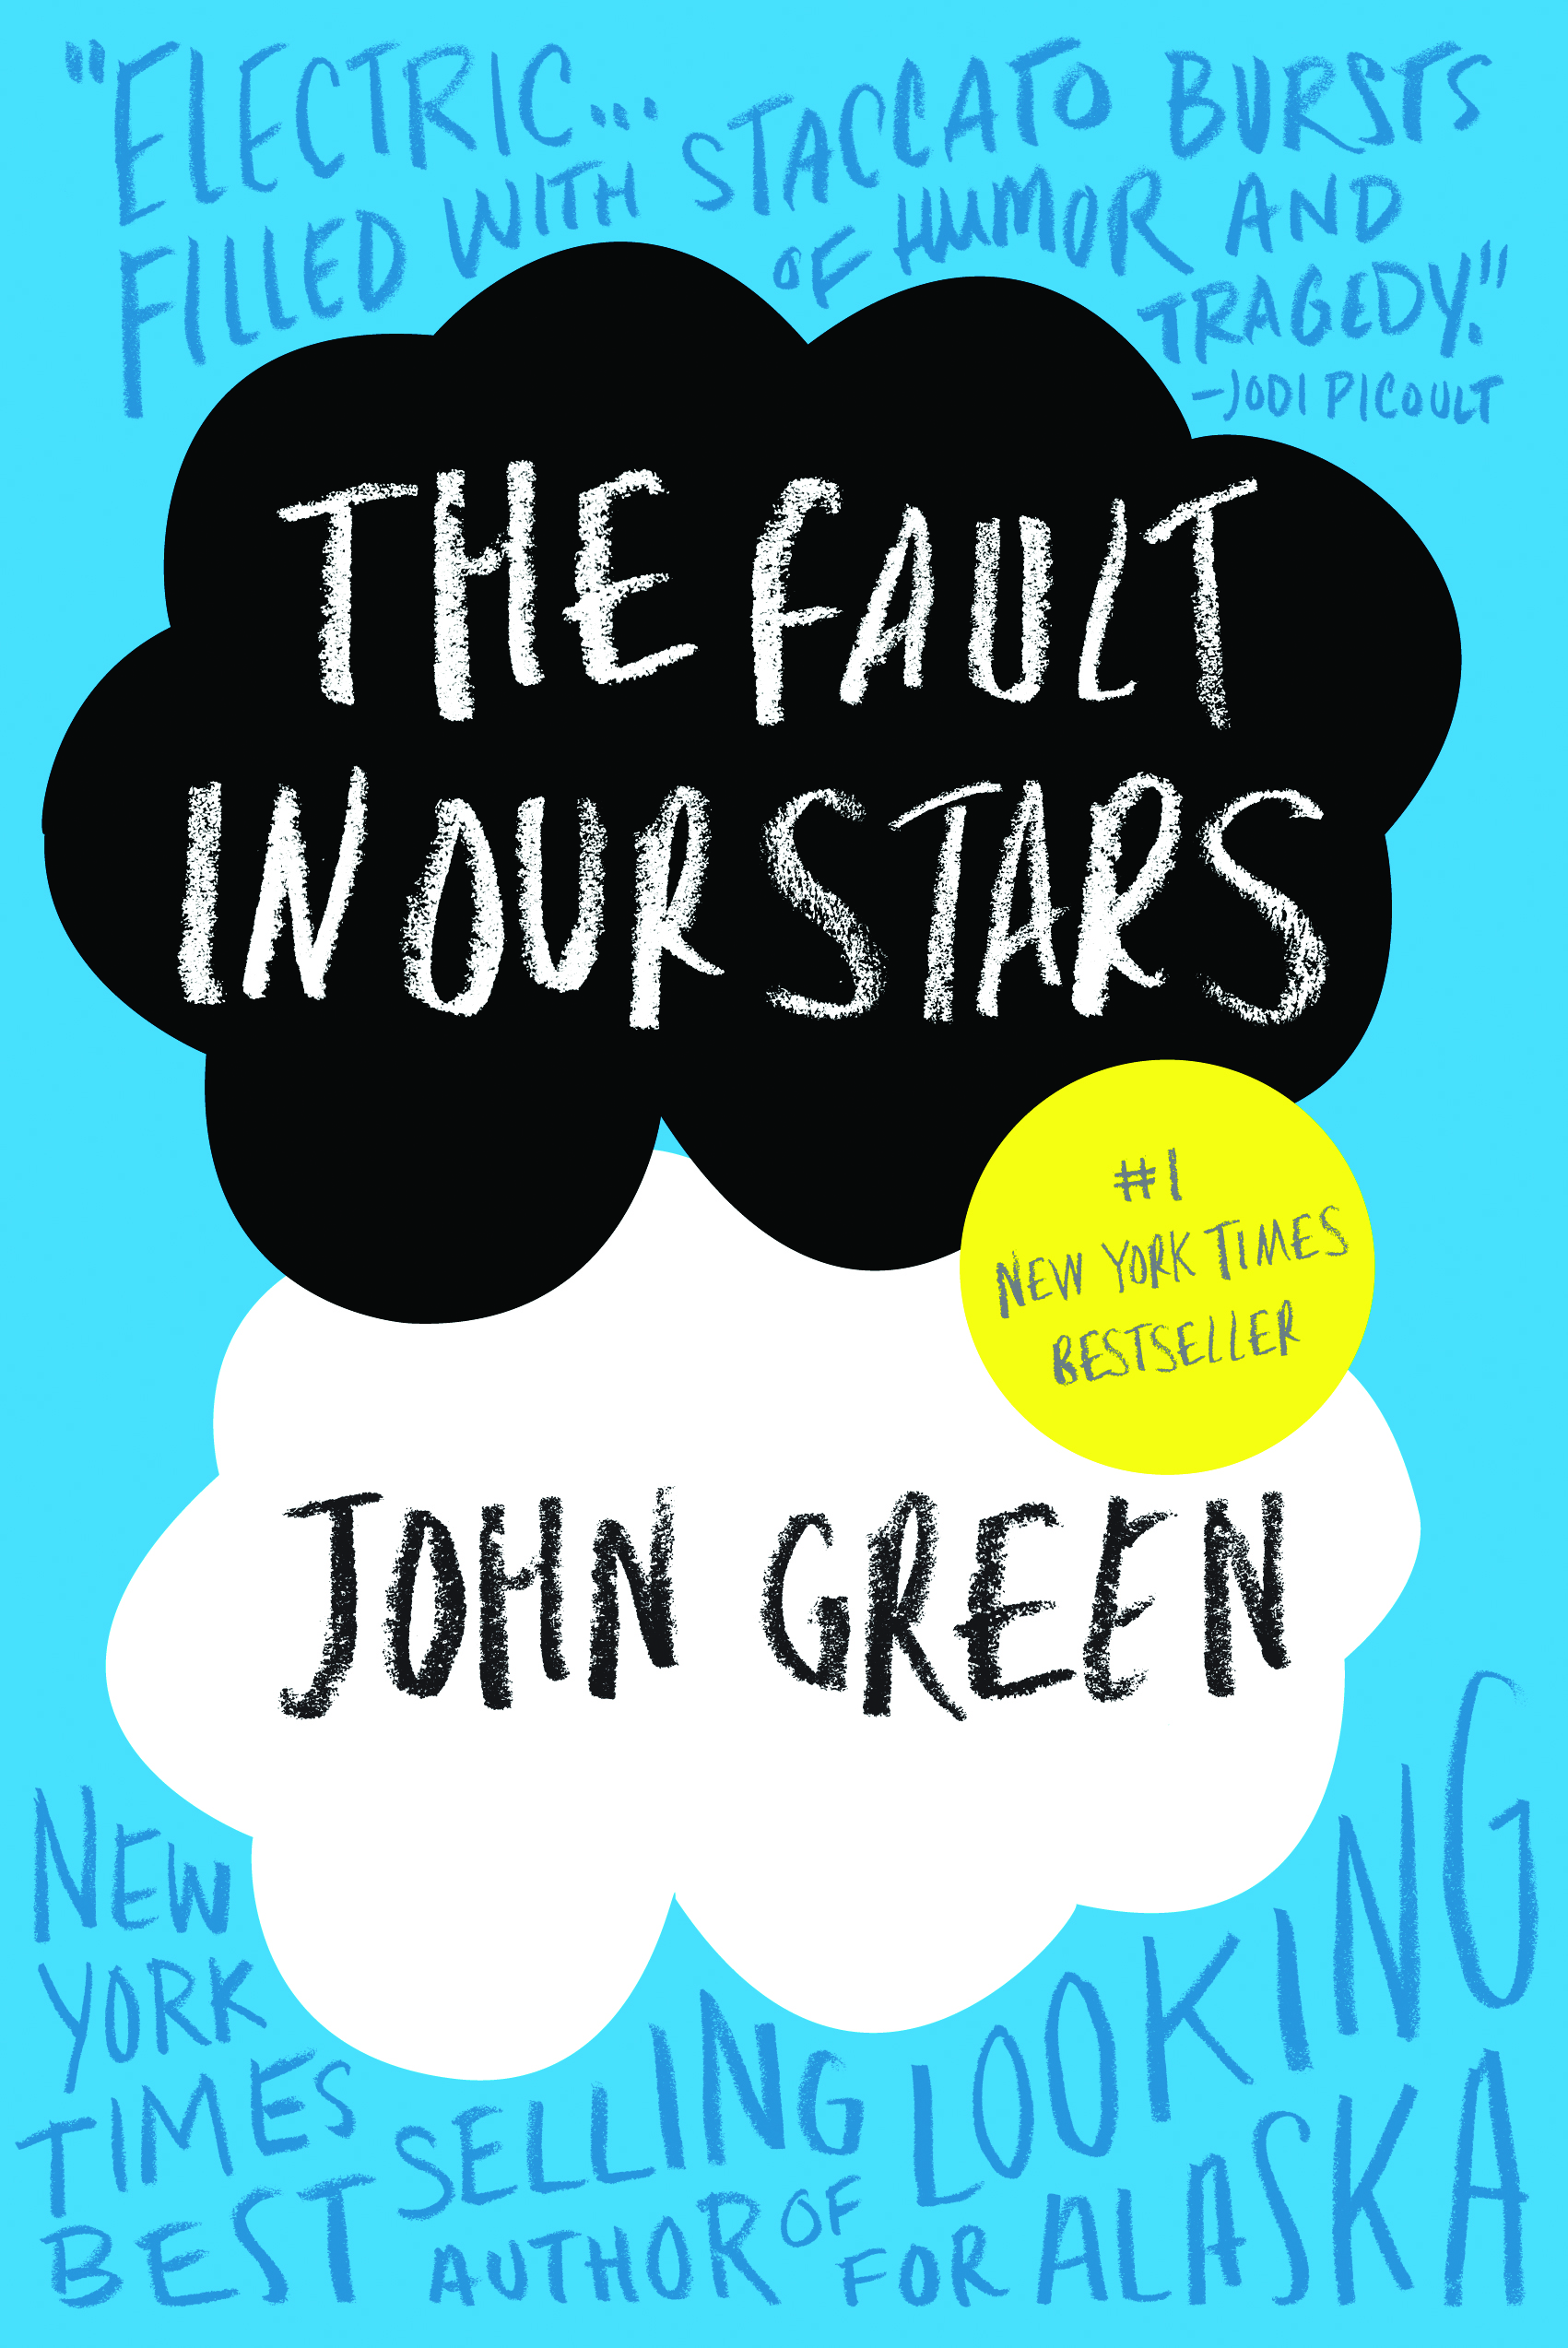 The Fault in Our StarsBy John Green. Hazel, a 16-year-old cancer patient whose prognosis is dim, has her life transformed when she falls in love with a young man she meets at a support group.